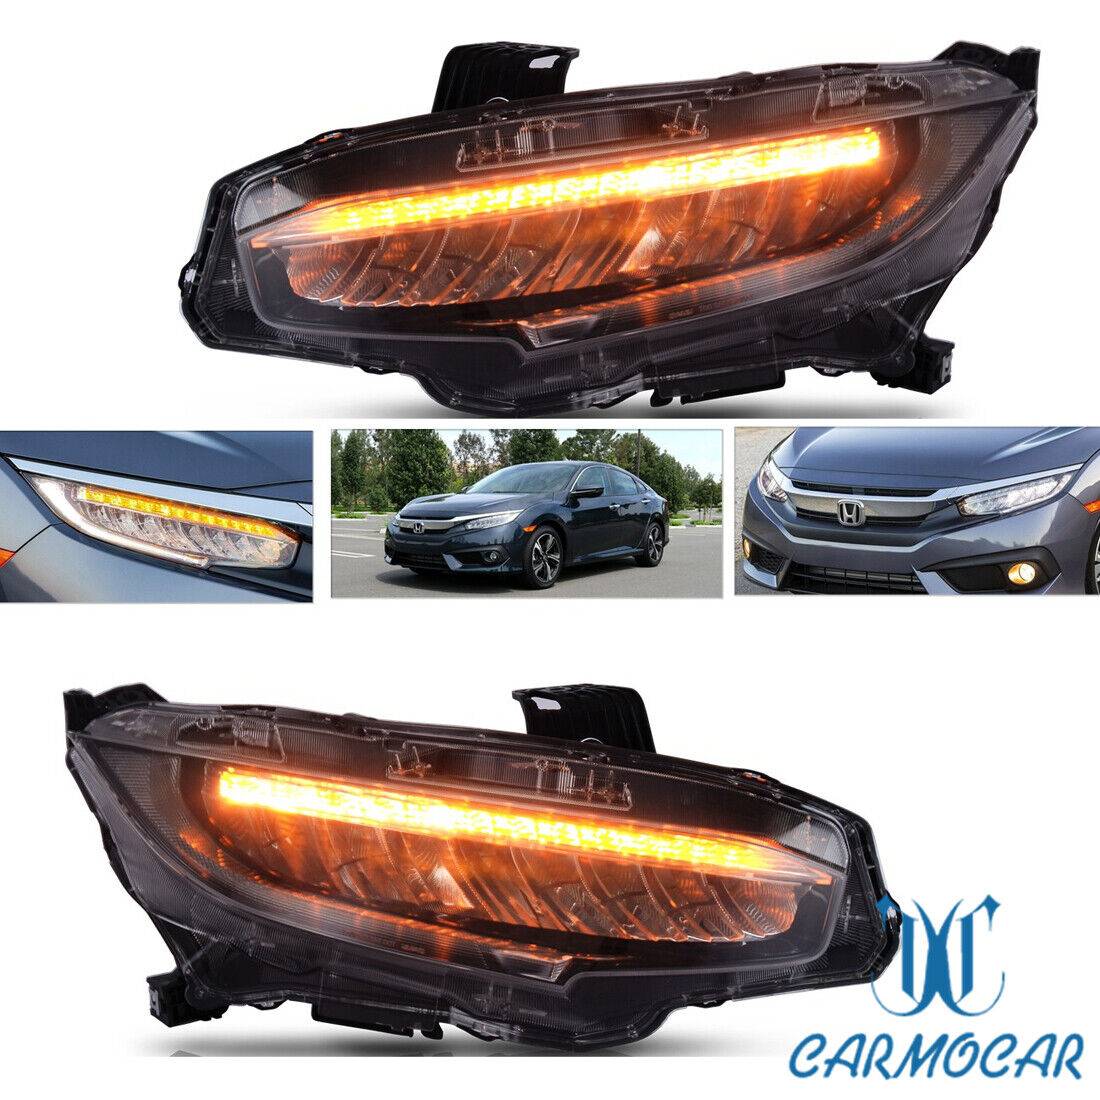 FITS 2016-2018 HONDA CIVIC TYPE-R STYLE HEADLIGHT LED DRL+SEQUENTIAL TURN SIGNAL